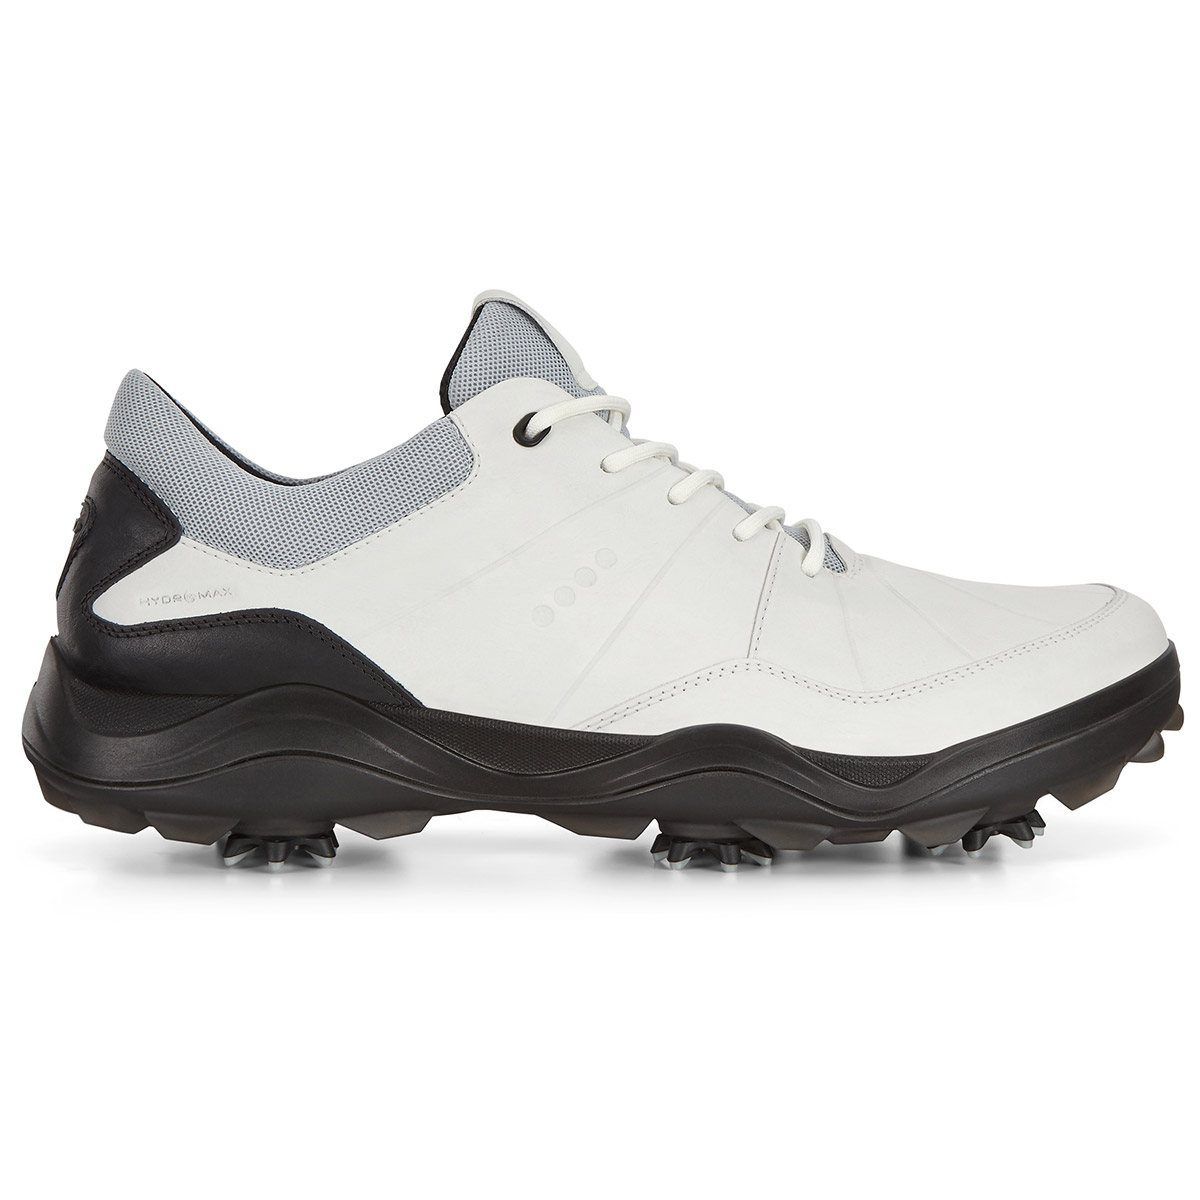 ECCO Golf Strike Shoes from american golf